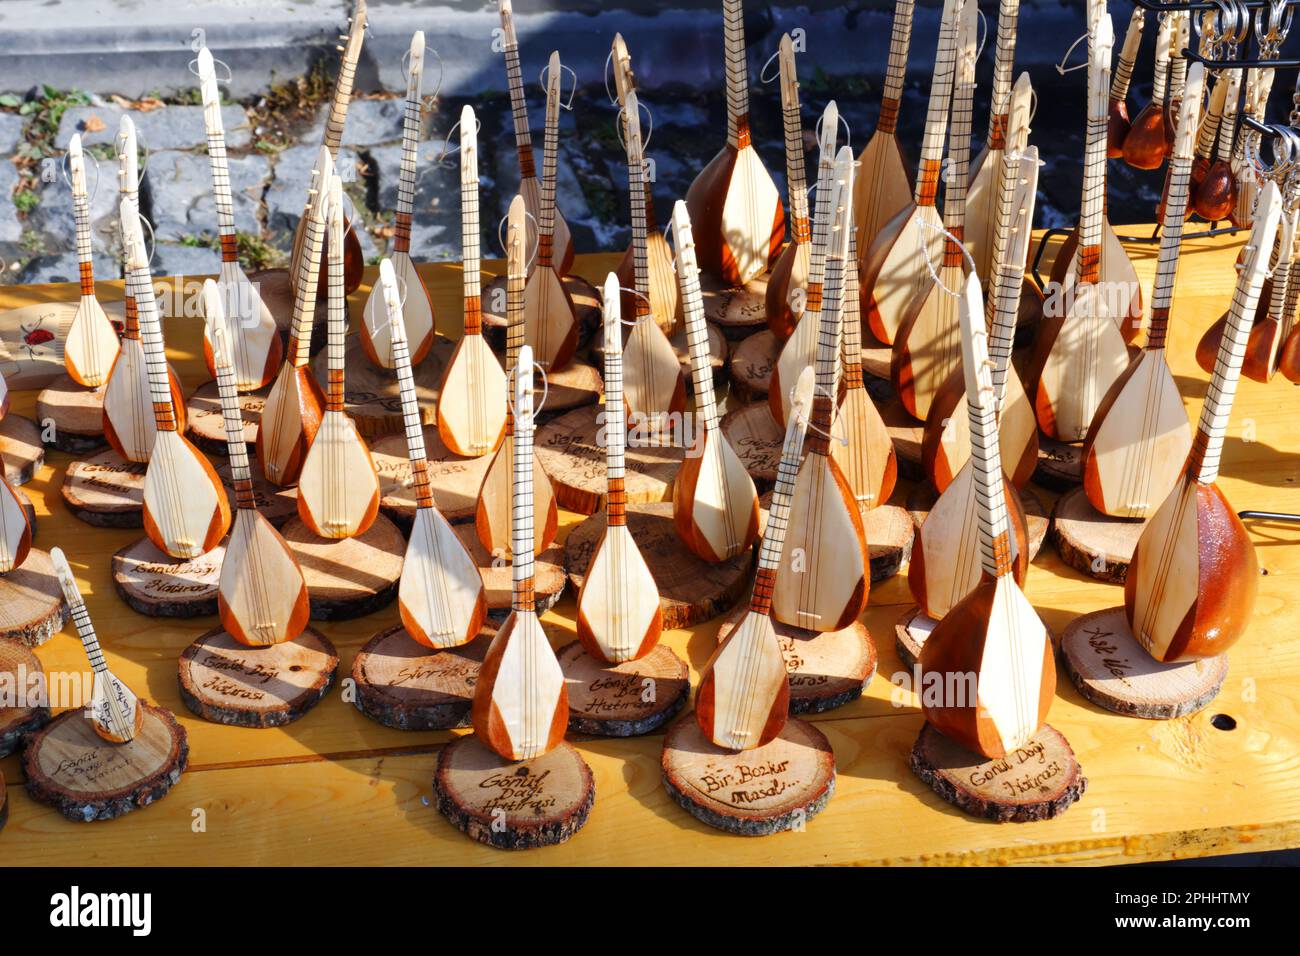 Miniature baglama and saz sold as Souvenir in a sunny day outdoor. Baglama is a typical Turkish musical instrument played often in Turkish culture. Stock Photo